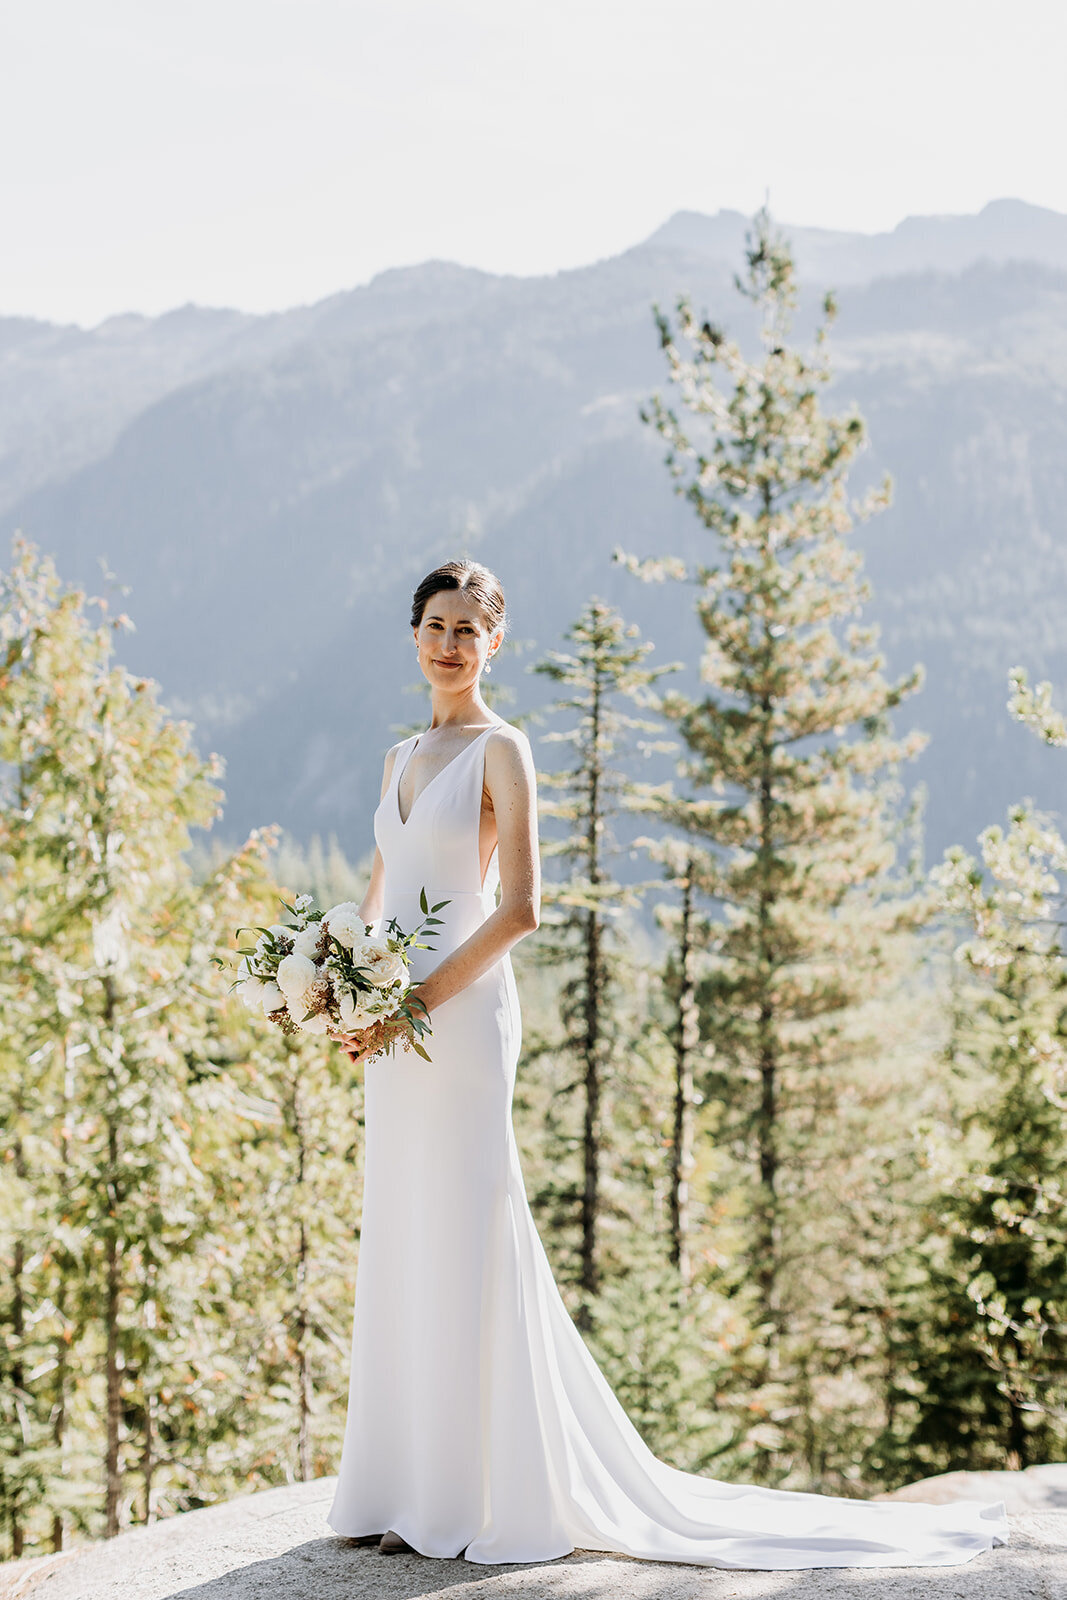 Bride with custom flowers for Sea to Sky Gondola wedding Squamish - Within the Flowers